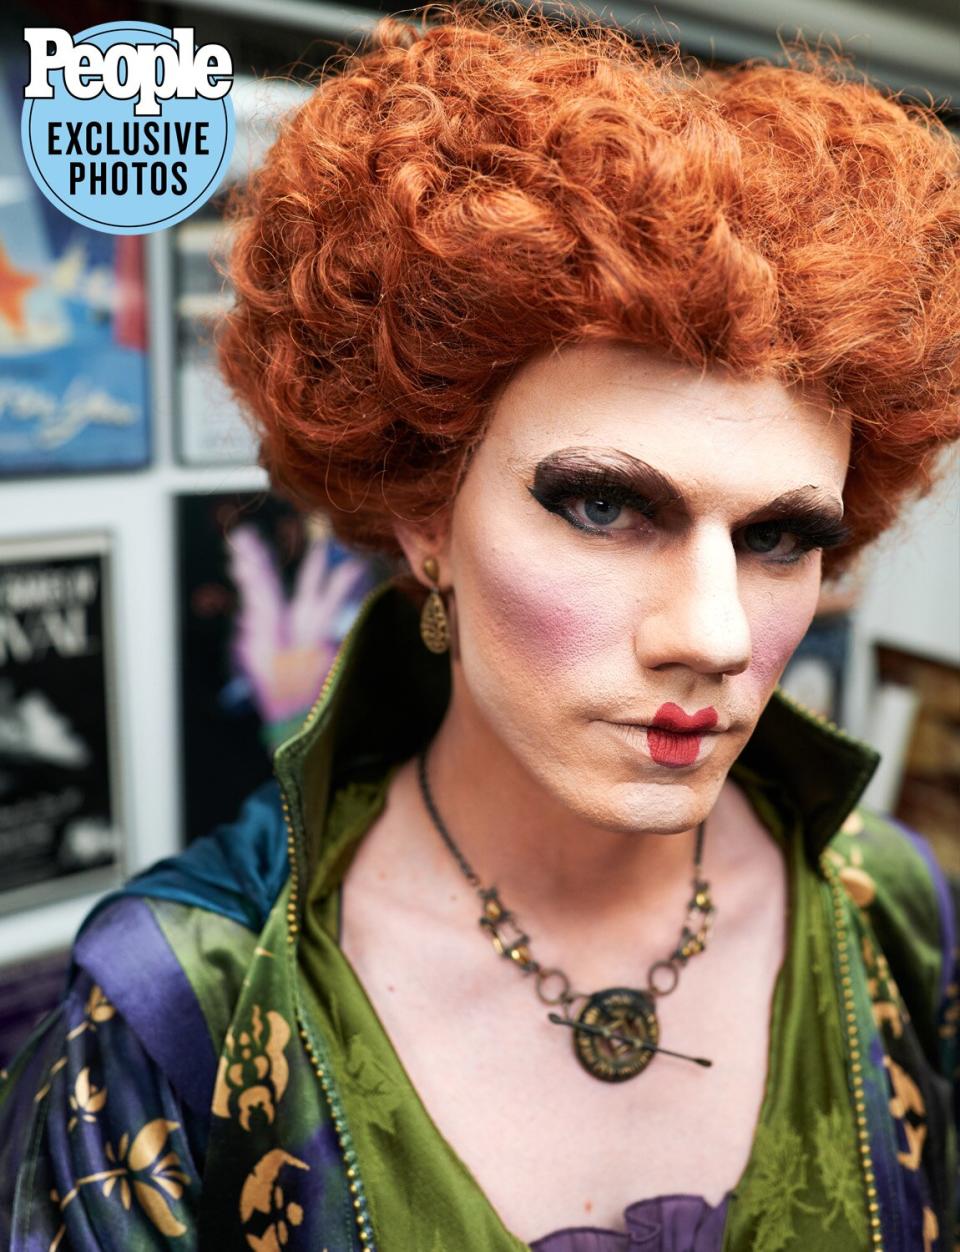  Jay Armstrong Johnson’s transformation to Winifred Sanderson  Where was the image taken – Broadway Cares/Equity Fights AIDS NYC  When was the image taken – October 1, 2022  Who took the photograph – Jenny Anderson  Full credit line – Photo by Jenny Anderson Jay Armstrong Johnson Makeup by Kyle Krueger, Alcone Costume Design by DW Produced by Katie Rosin, Kampfire Films